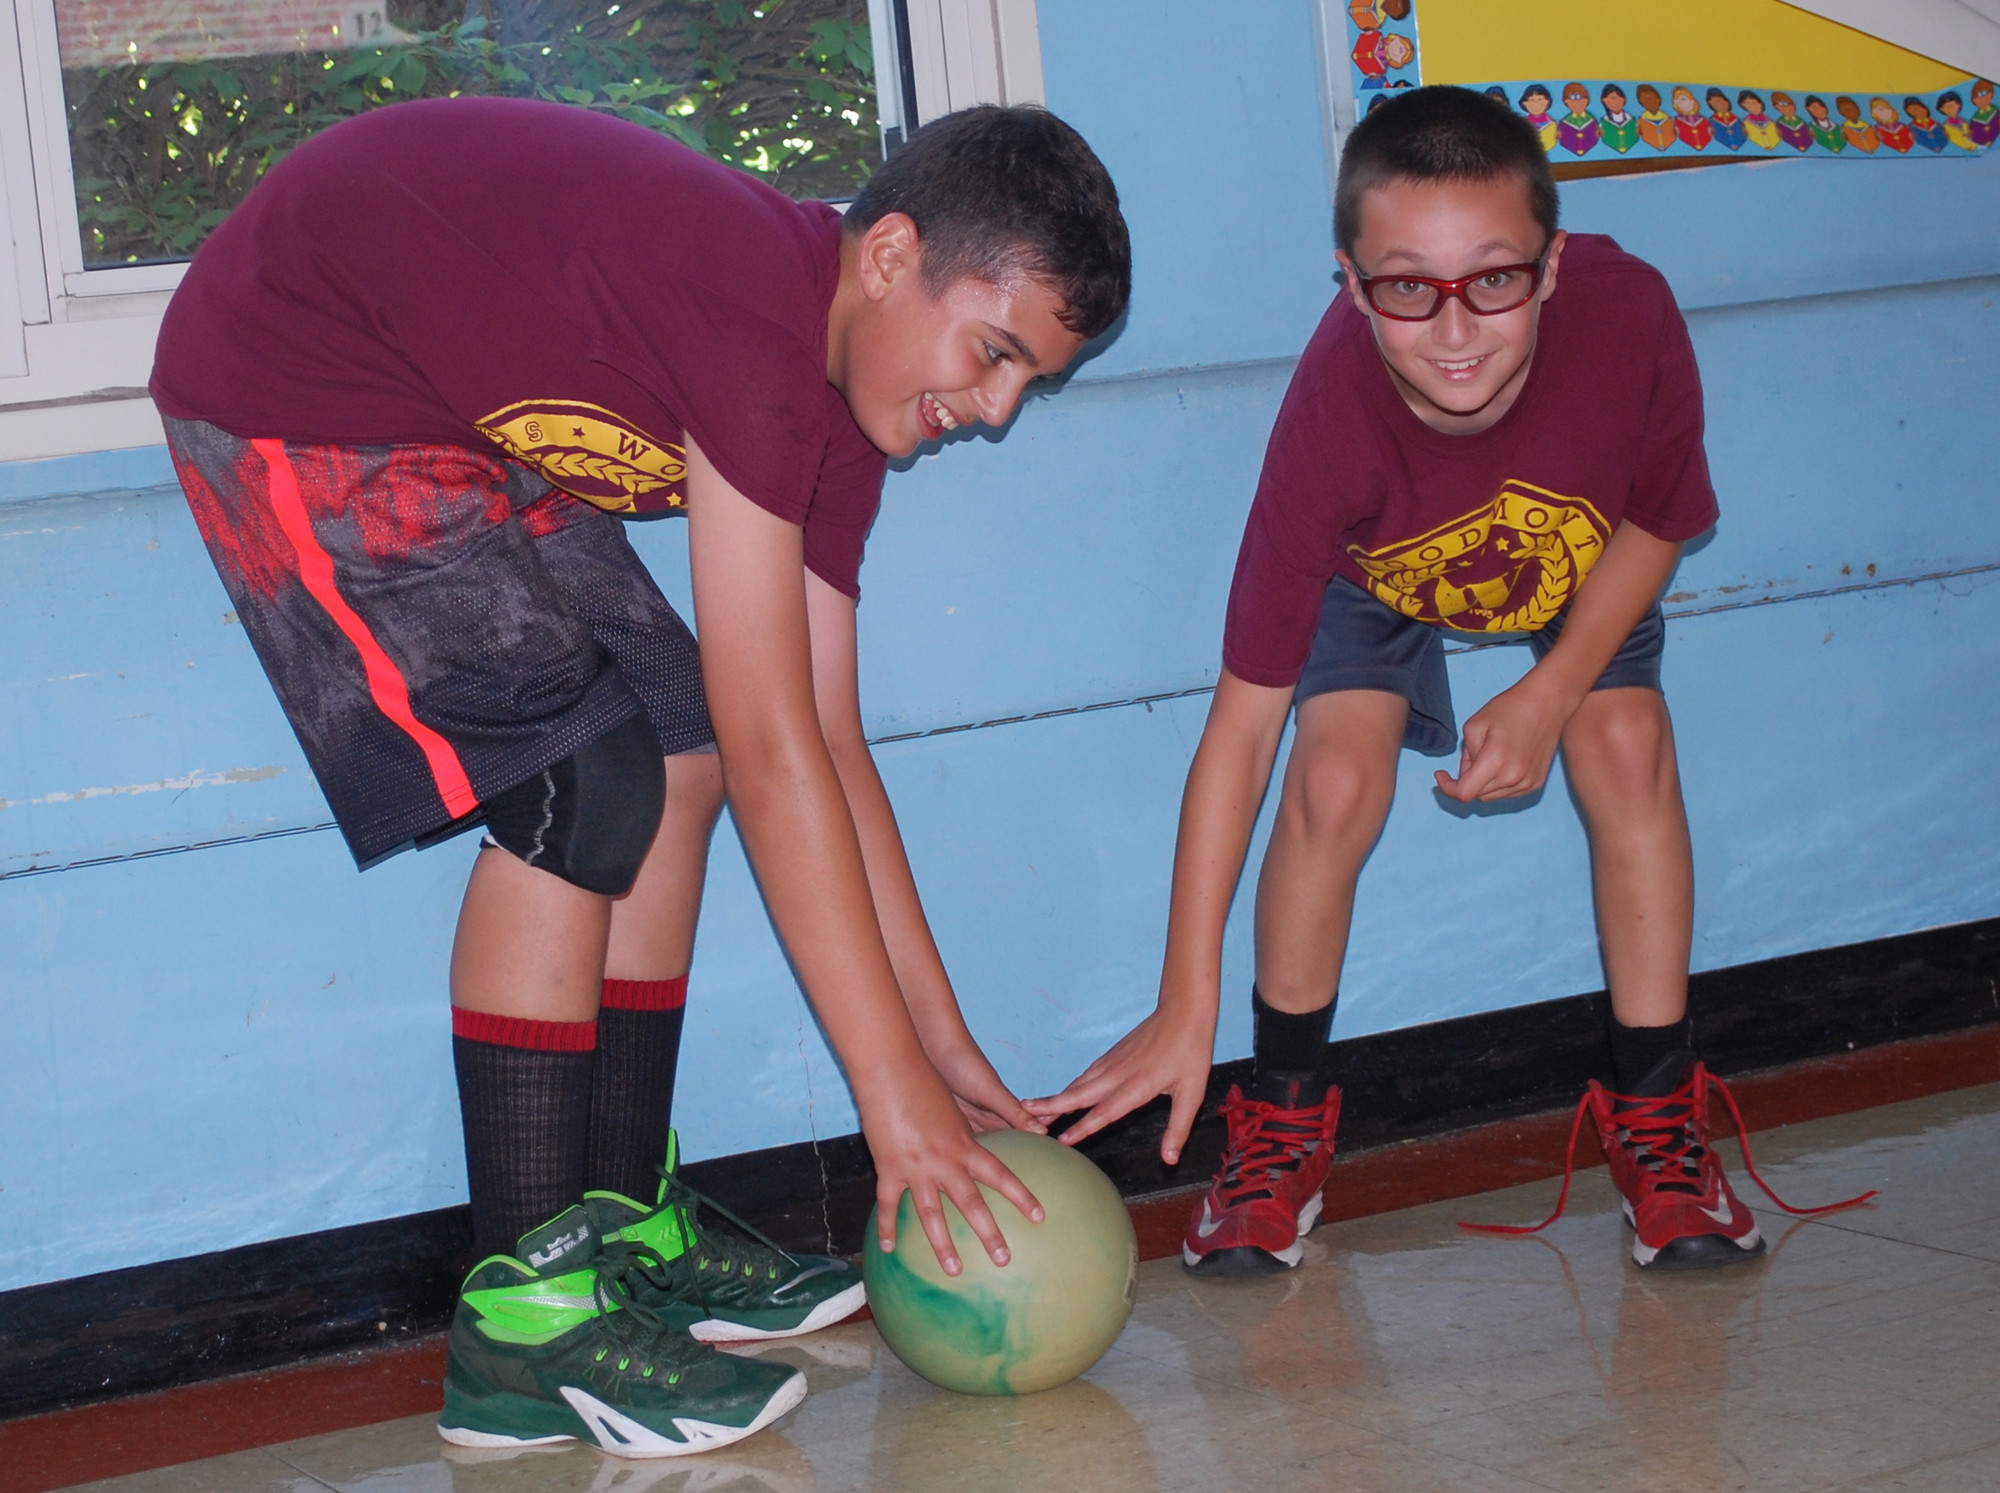 Michael Handell, 11, of Wantagh, left, and Jack Moore, 9, of Seaford, competed in a game of Ga-ga ball.